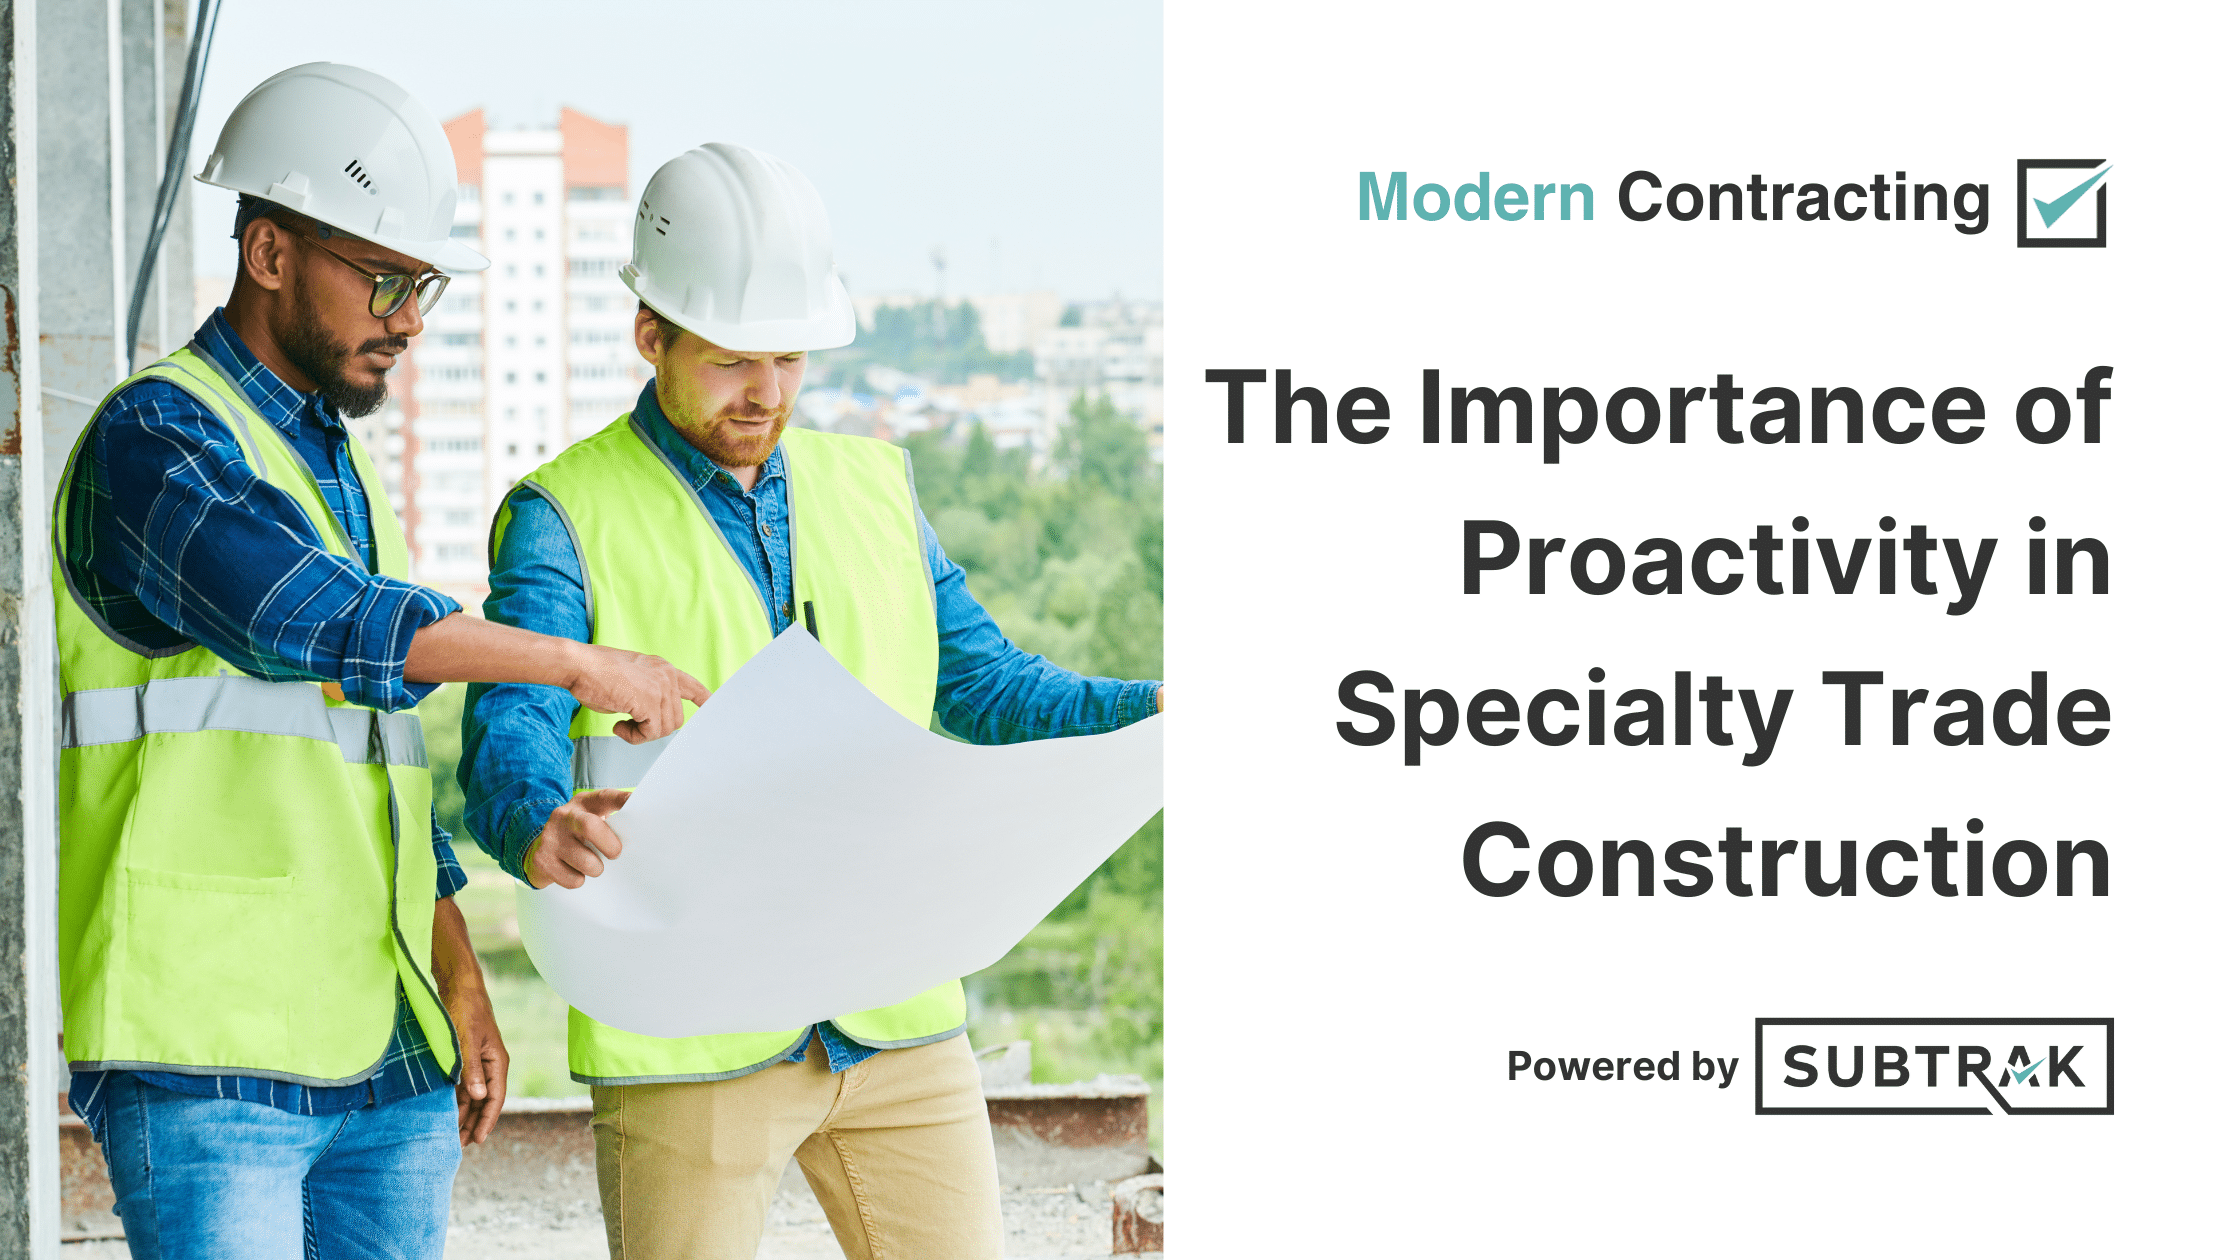 The Importance of Proactivity in Specialty Trade Construction